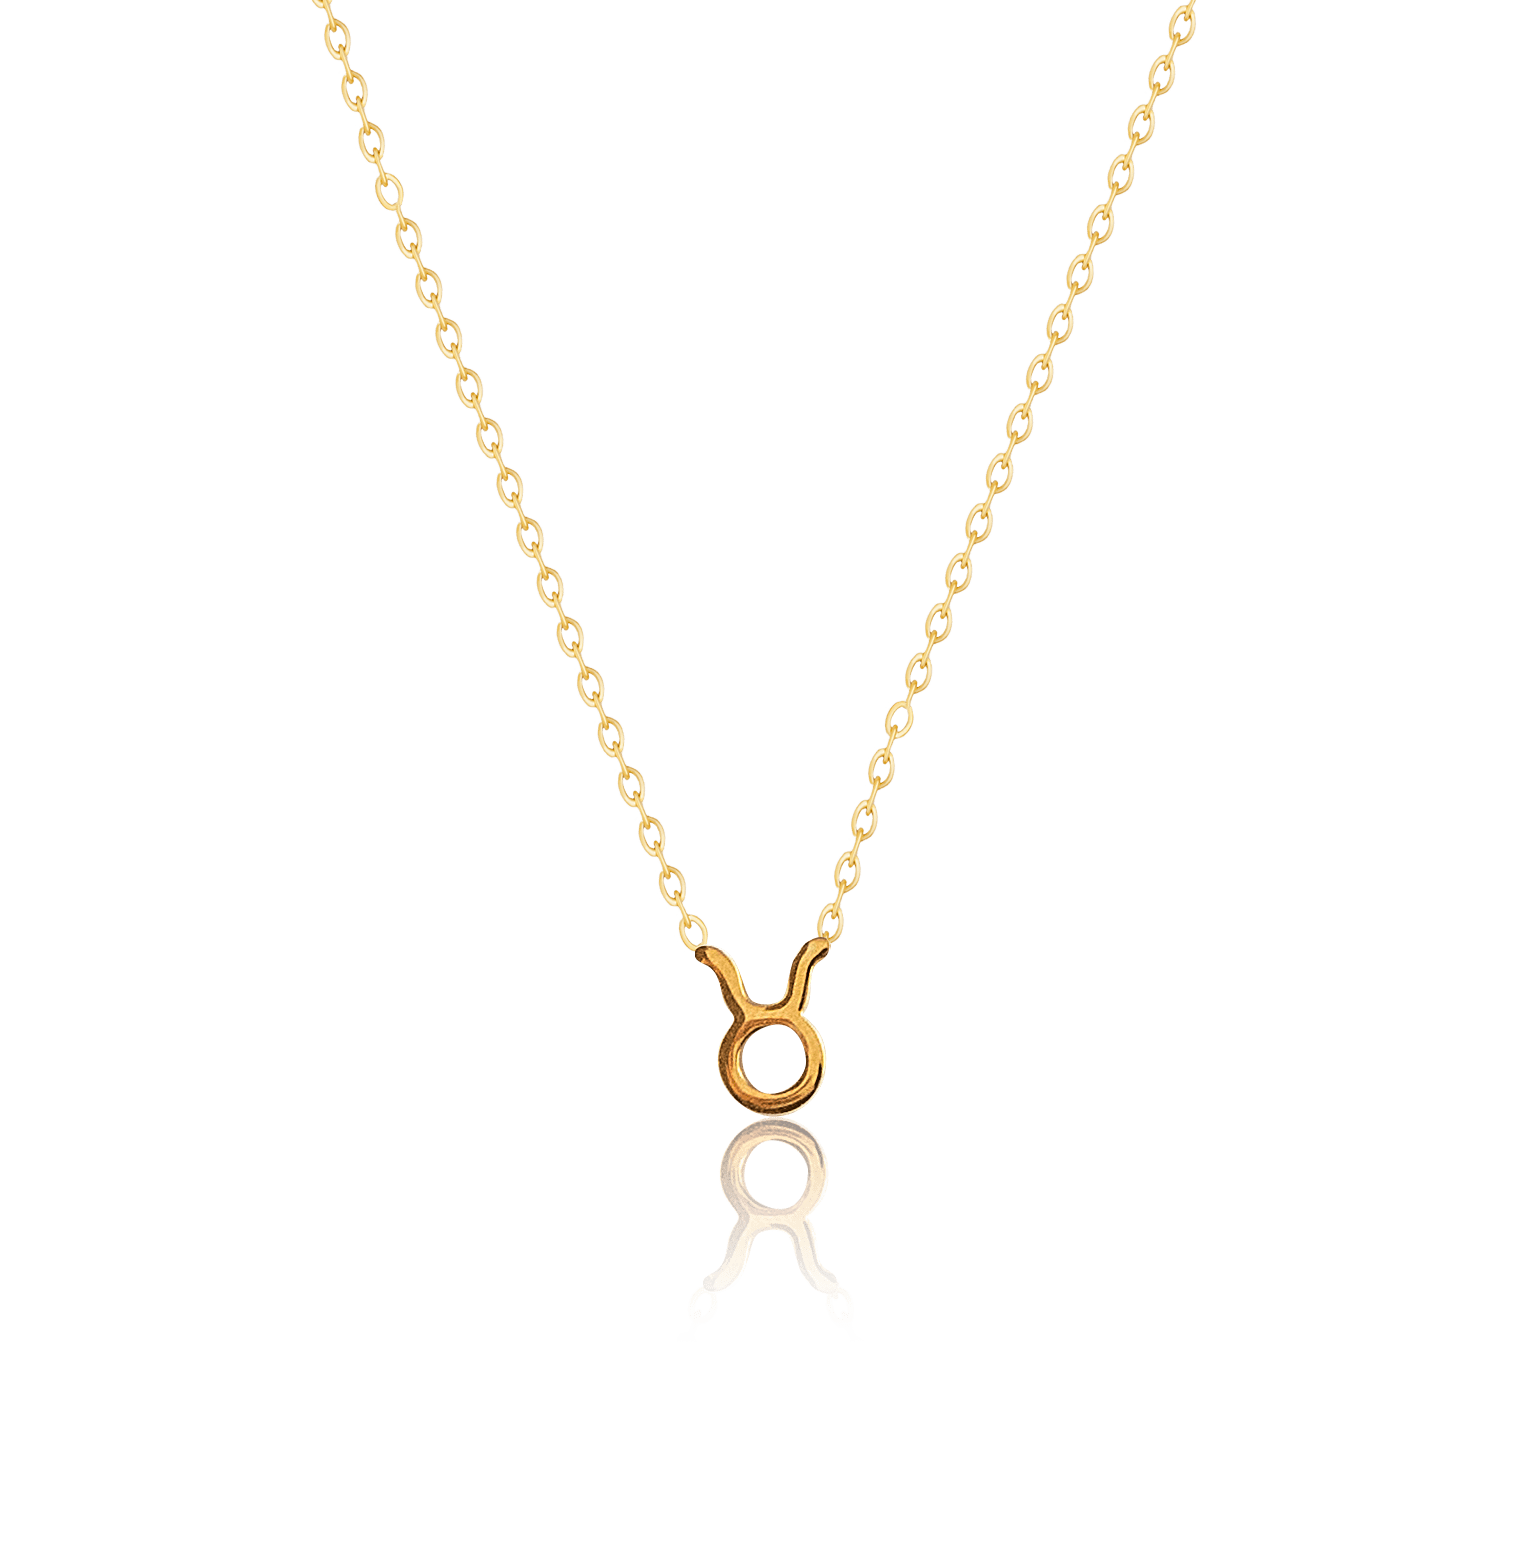 bianco rosso Necklaces Gold Taurus - Necklace cyprus greece jewelry gift free shipping europe worldwide